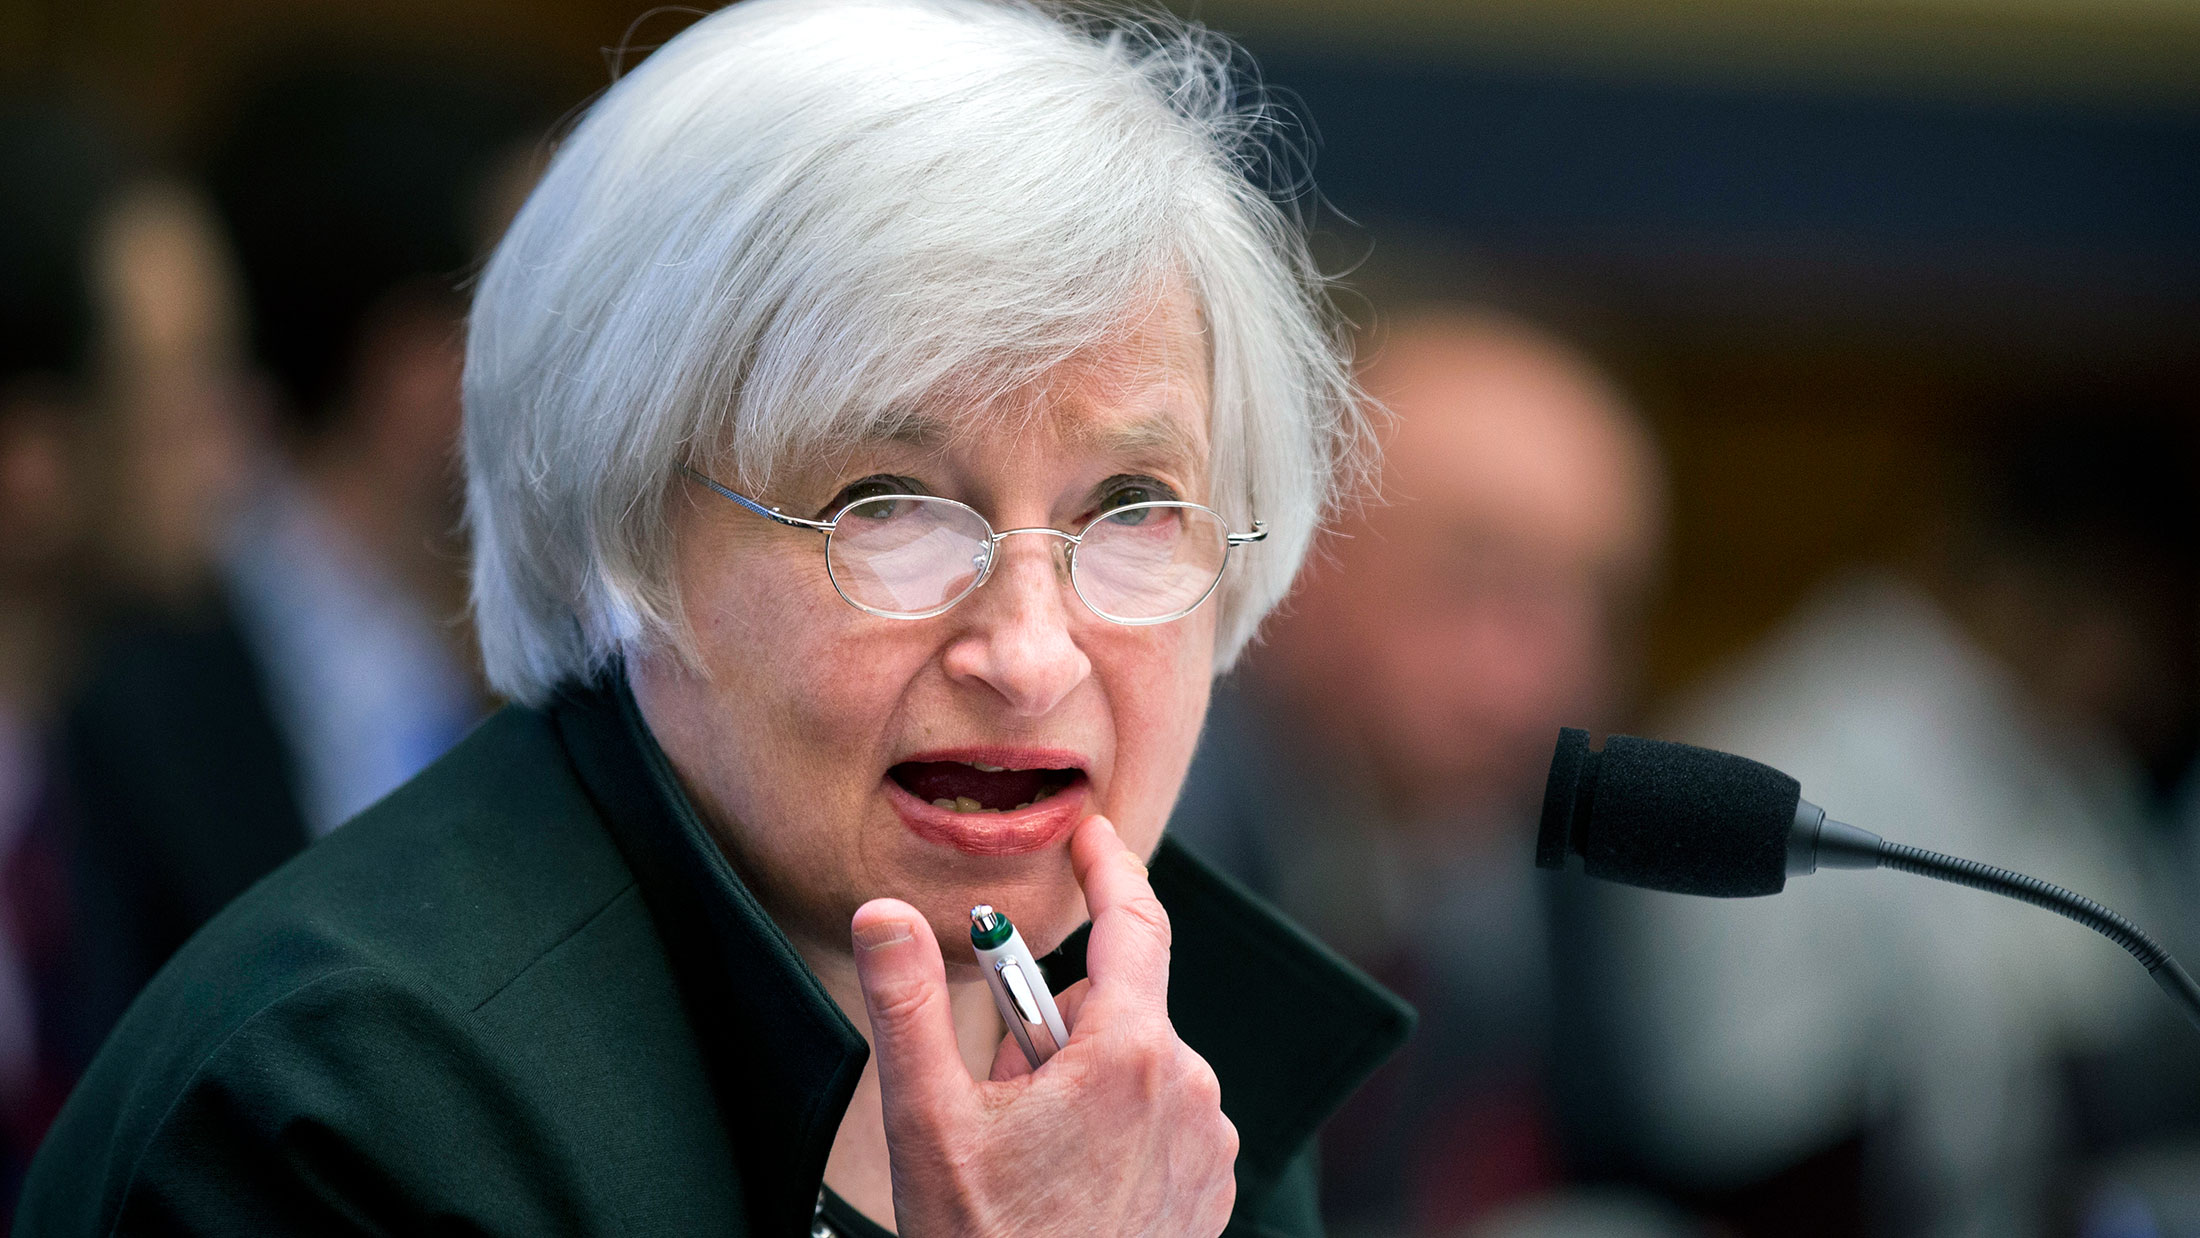 Federal Reserve Chair Janet Yellen on July 15, 2015, before the House Financial Services Committee hearing.
